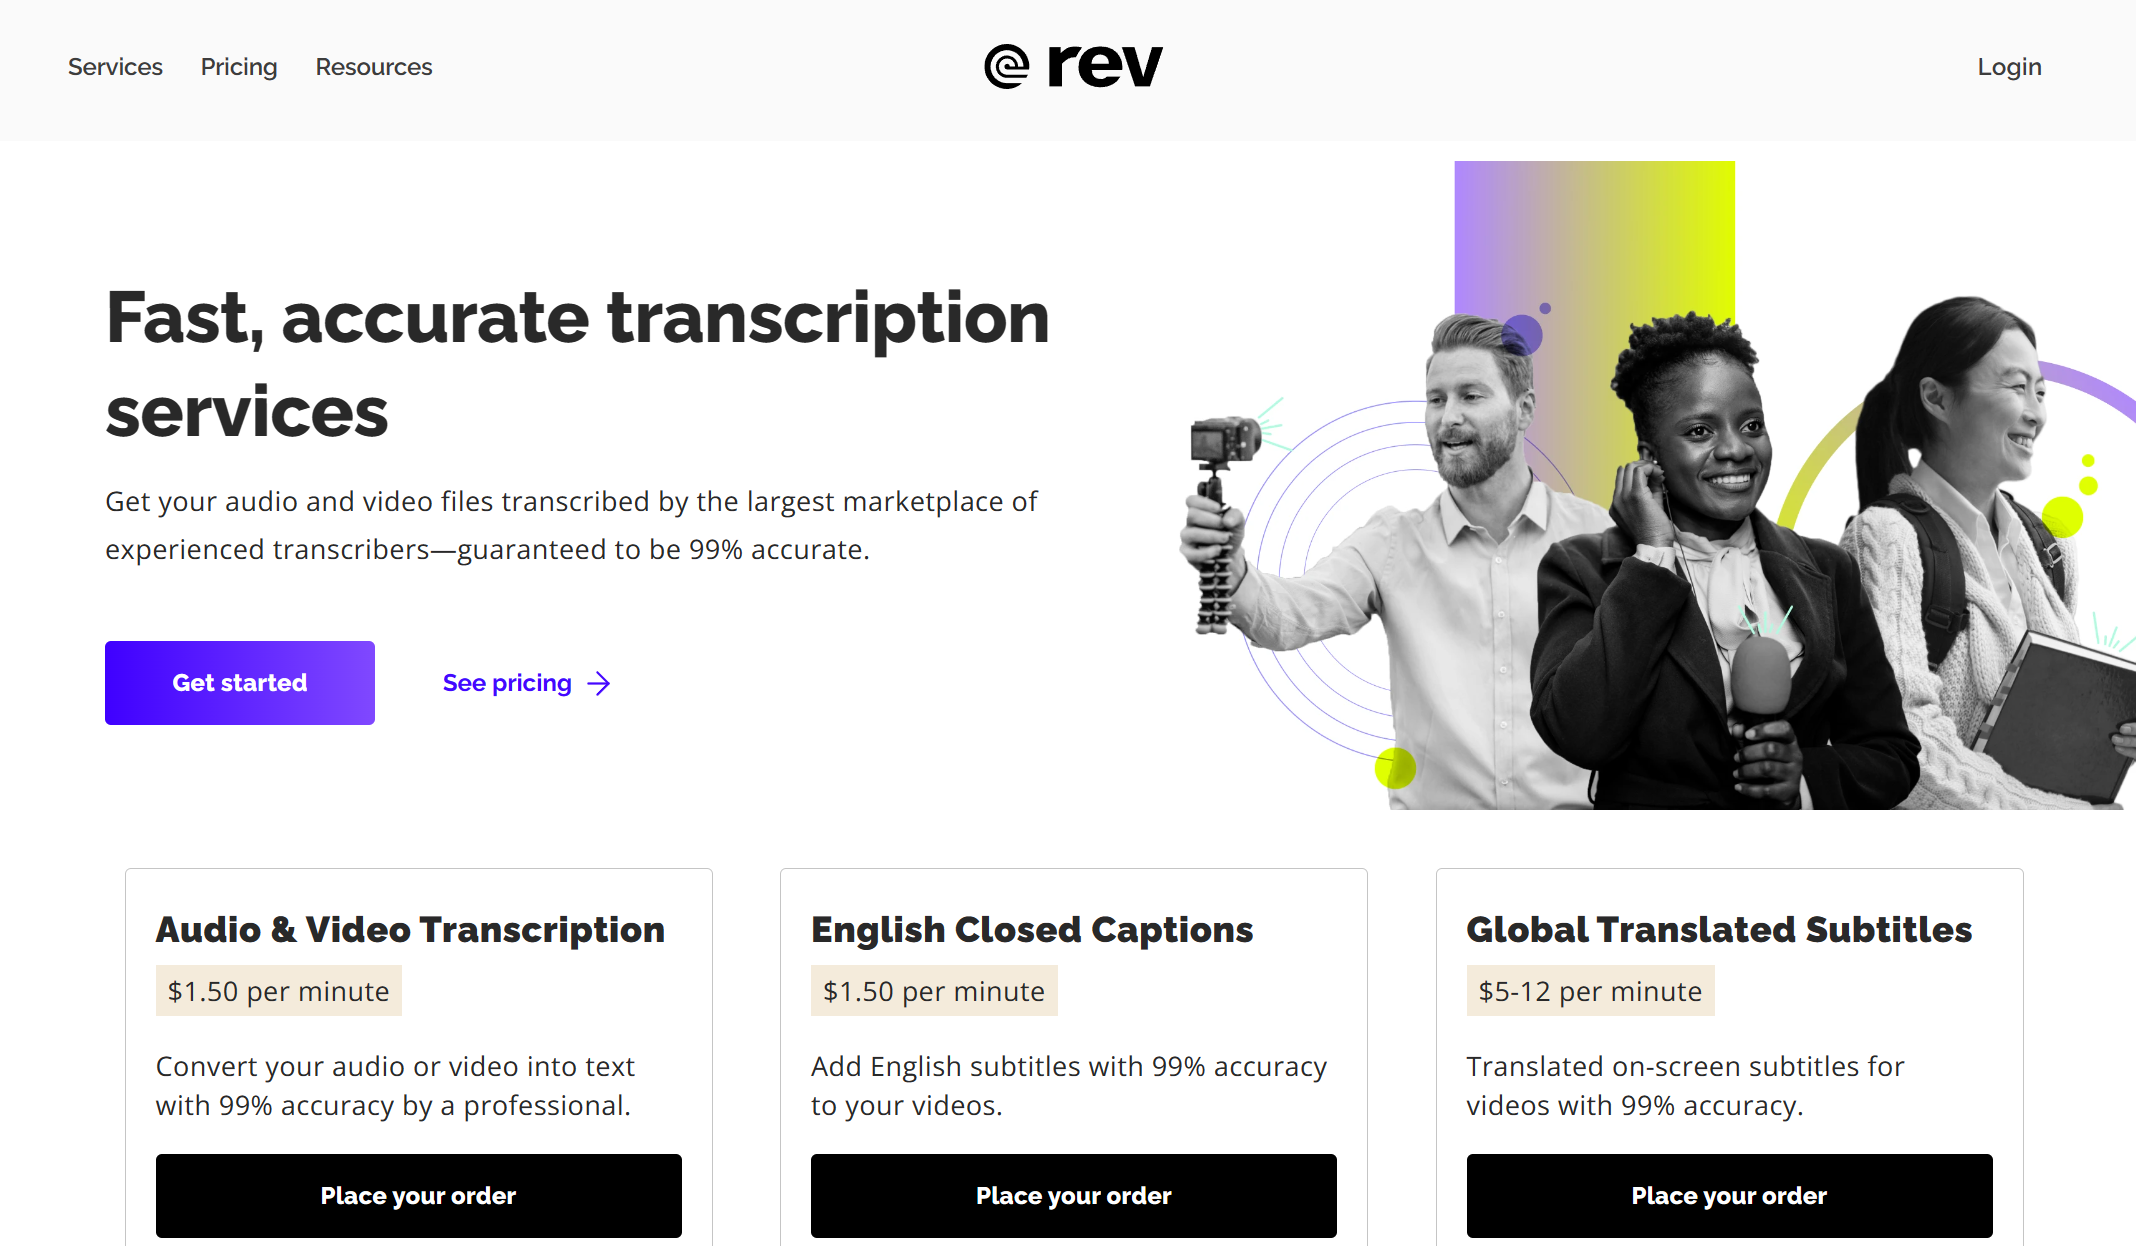 Rev is the self-acclaimed best meeting transcription software. Agree?